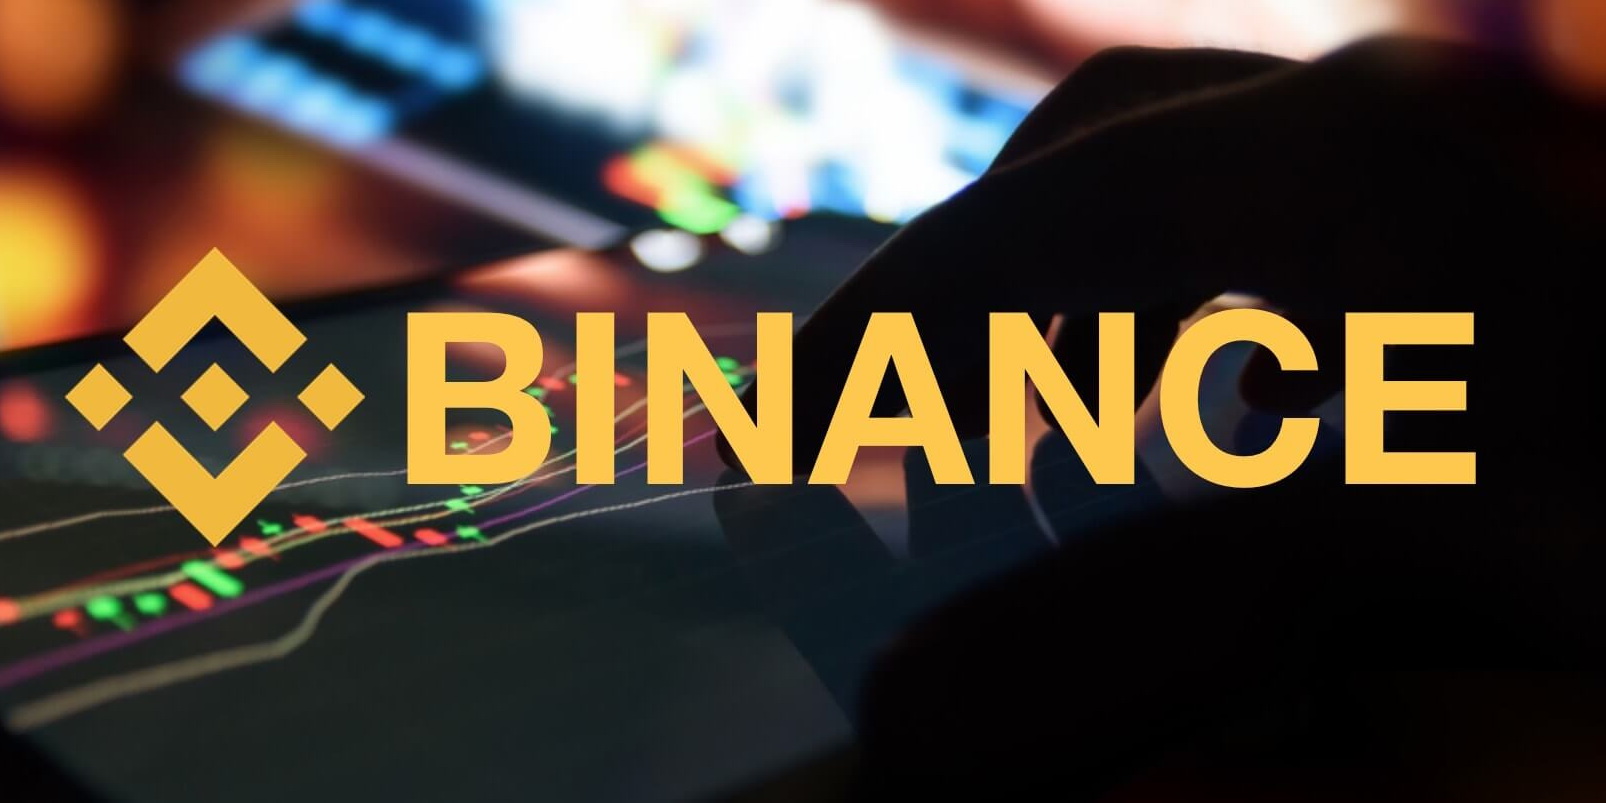 Binance is Planning to Launch Stock Tokens Starting with Tesla